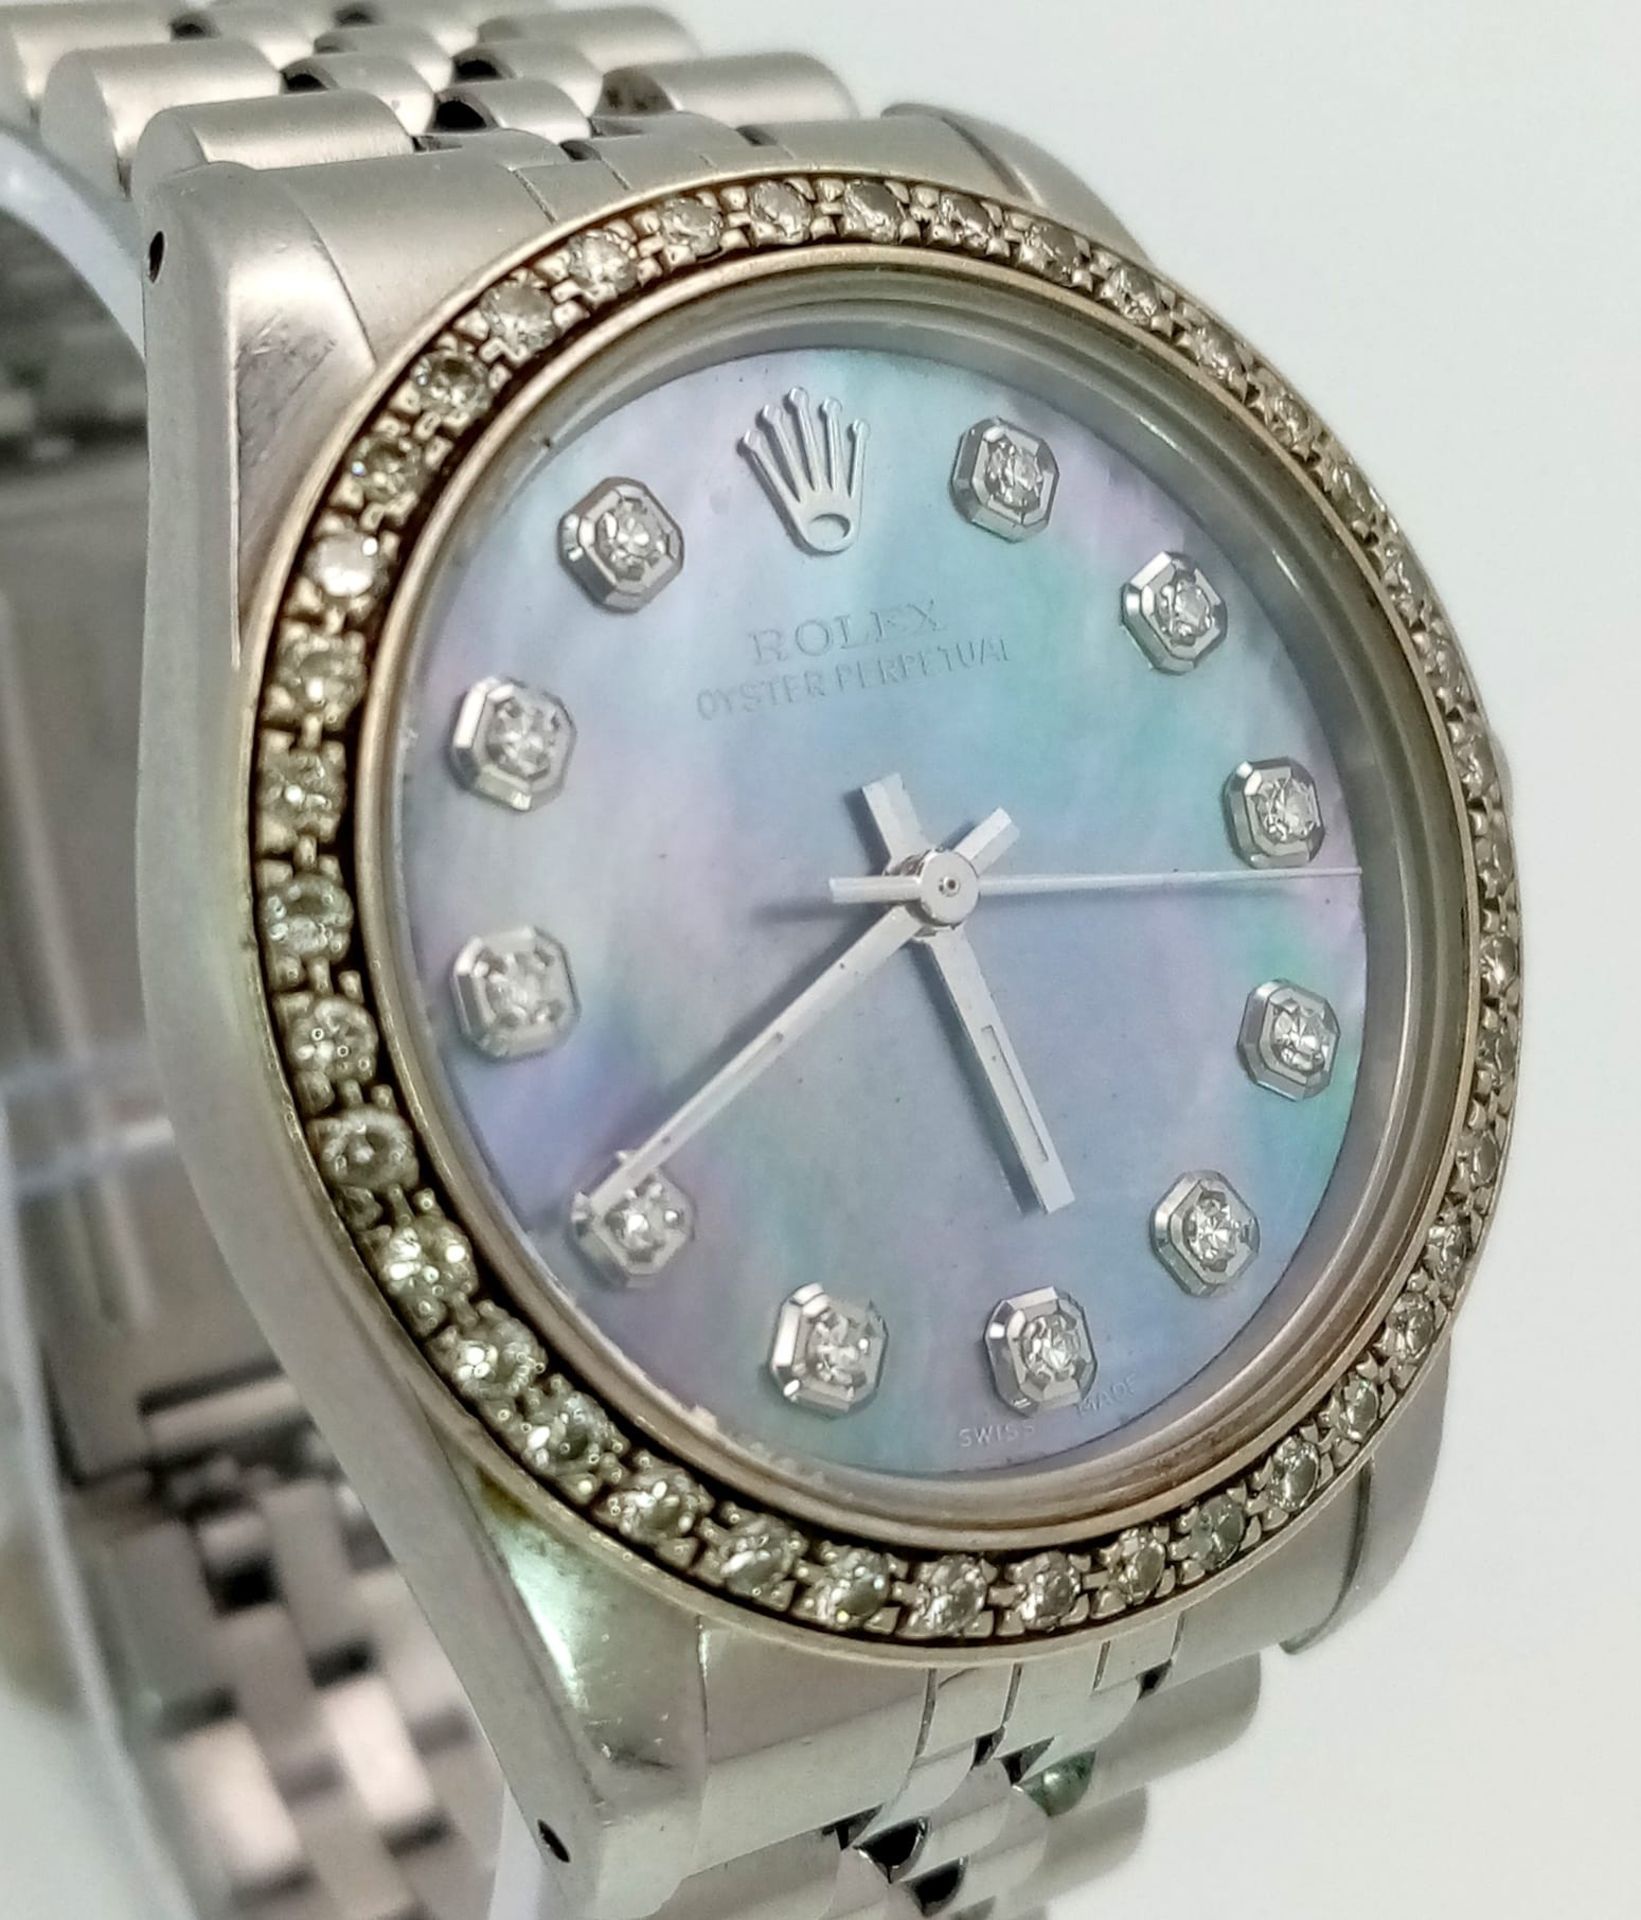 A ROLEX LADIES OYSTER PERPETUAL WRIST WATCH IN STAINLESS STEEL WITH DIAMOND BEZEL AND NUMERALS. - Image 3 of 9